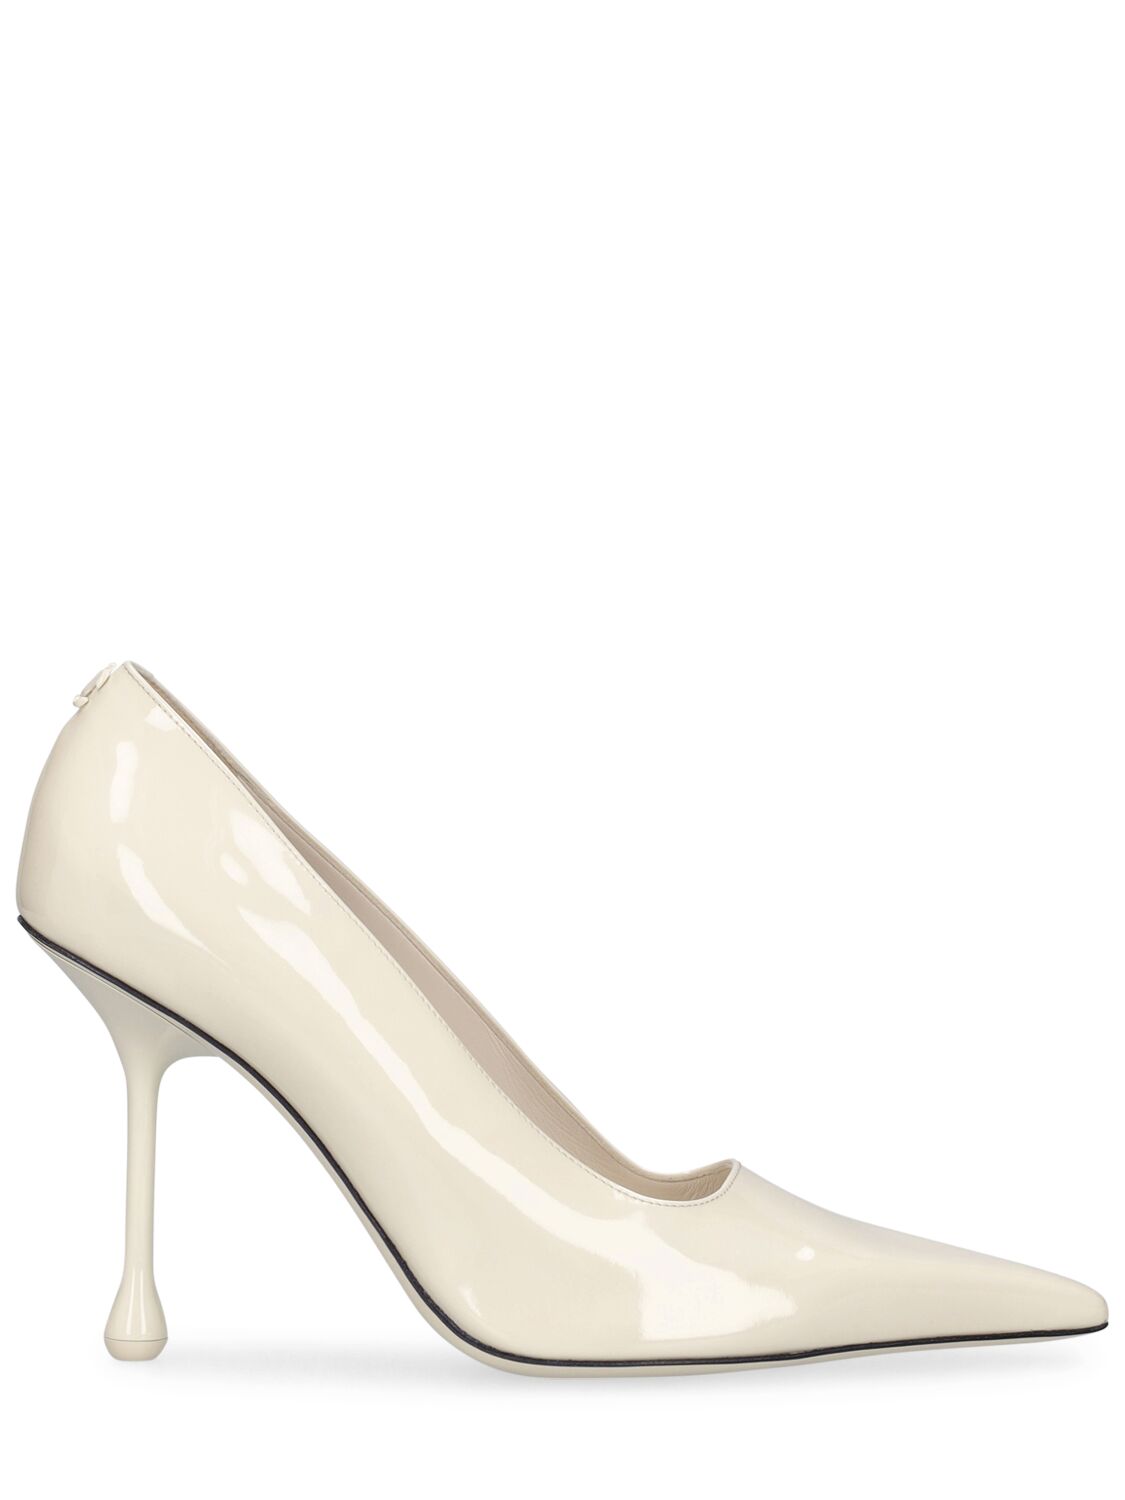 95mm Ixia Patent Leather Pumps